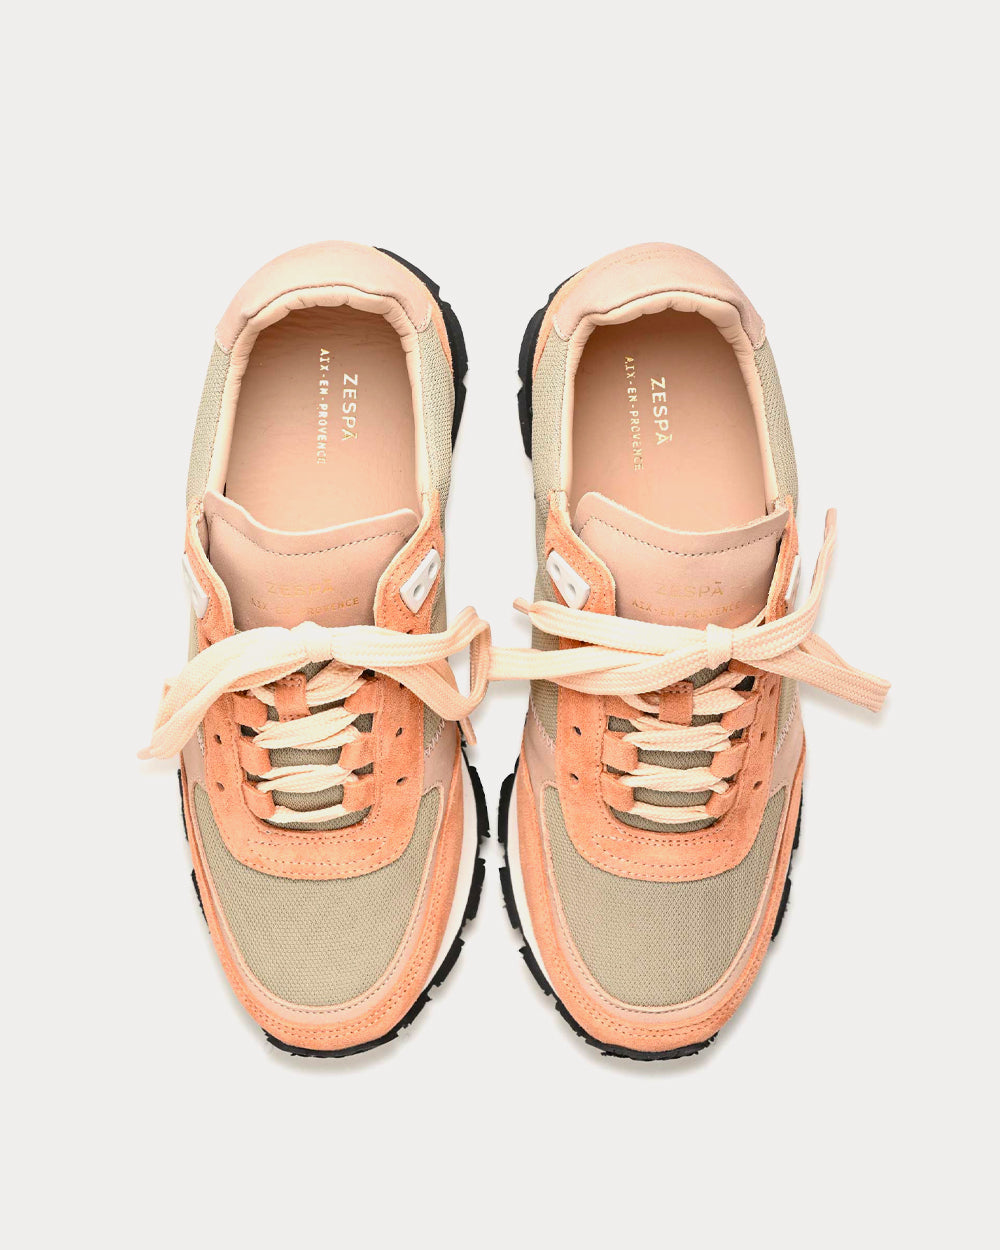 Zespa - ZSP6 Textile HS / Mix Nude / Taupe Low Top Sneakers